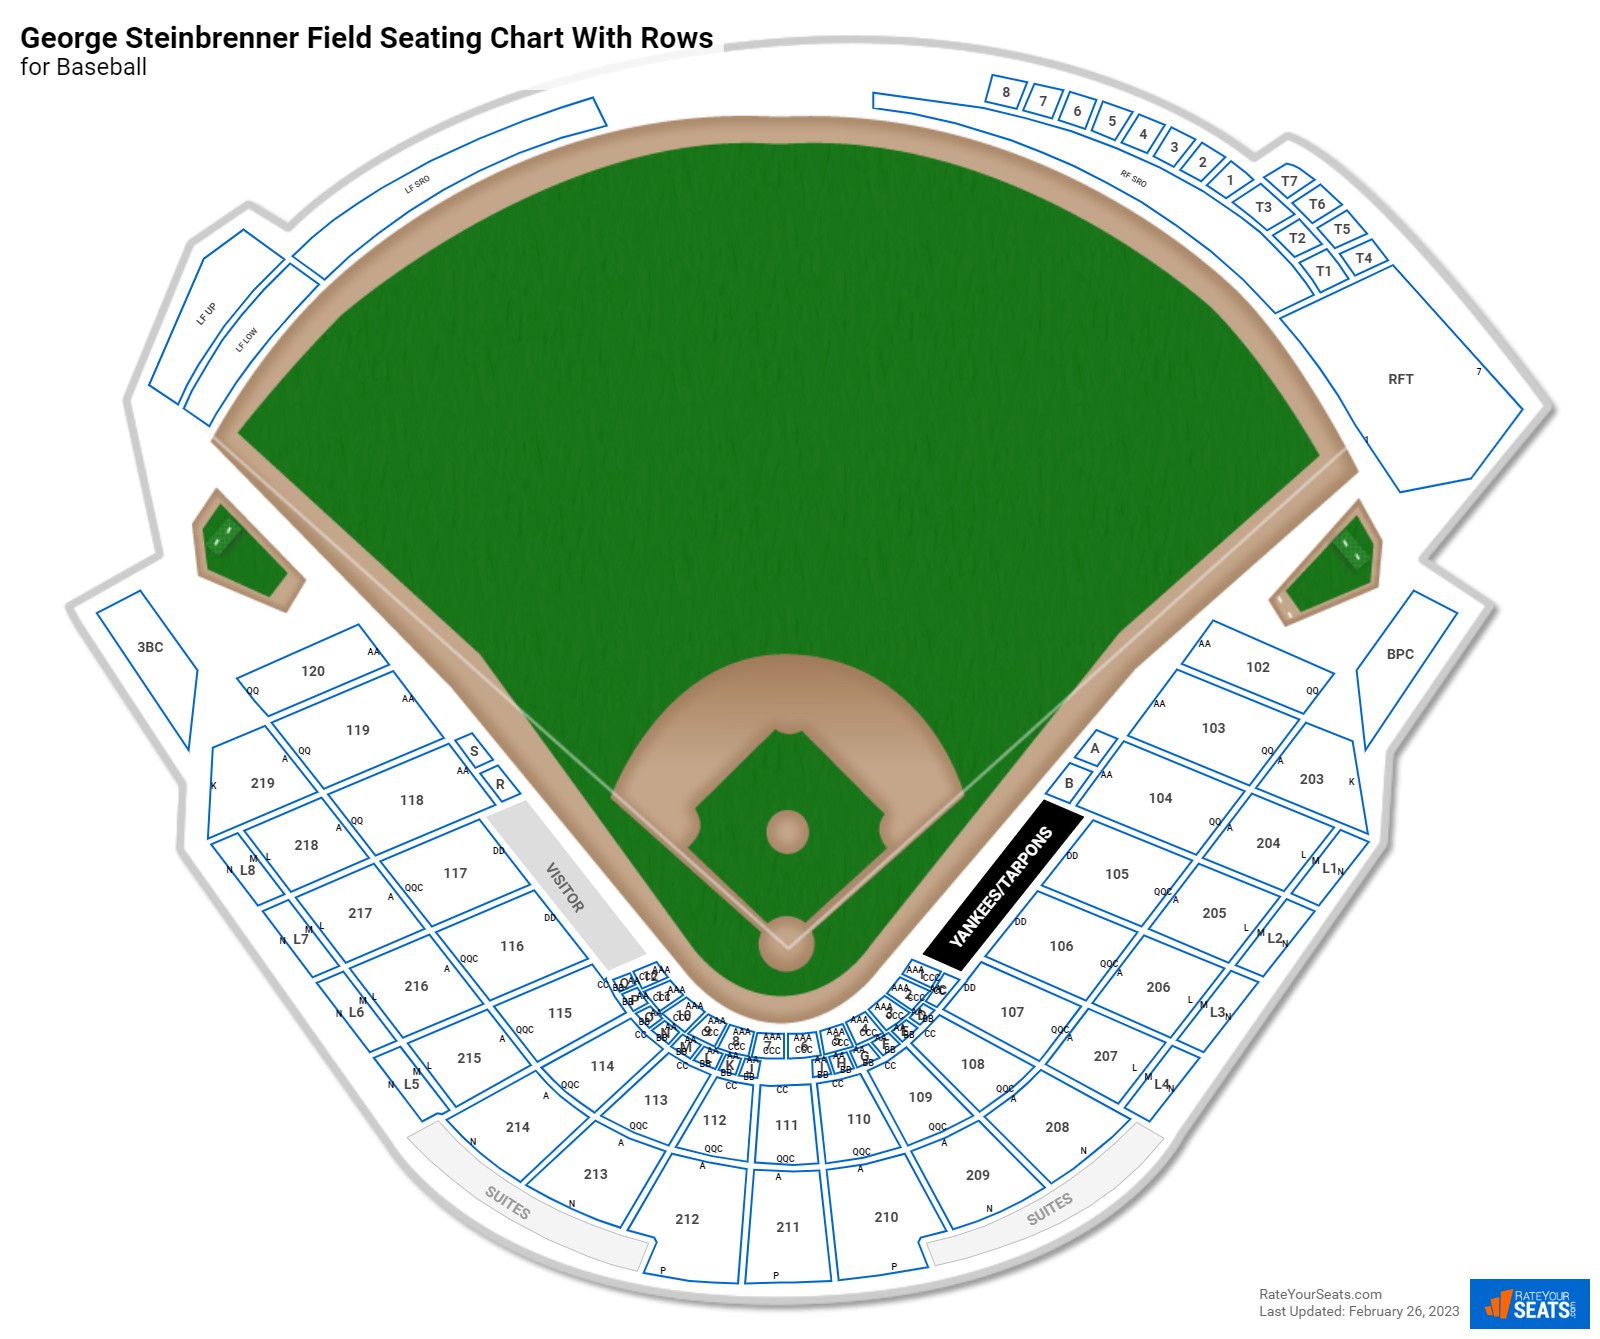 George Steinbrenner Field seating chart with row numbers